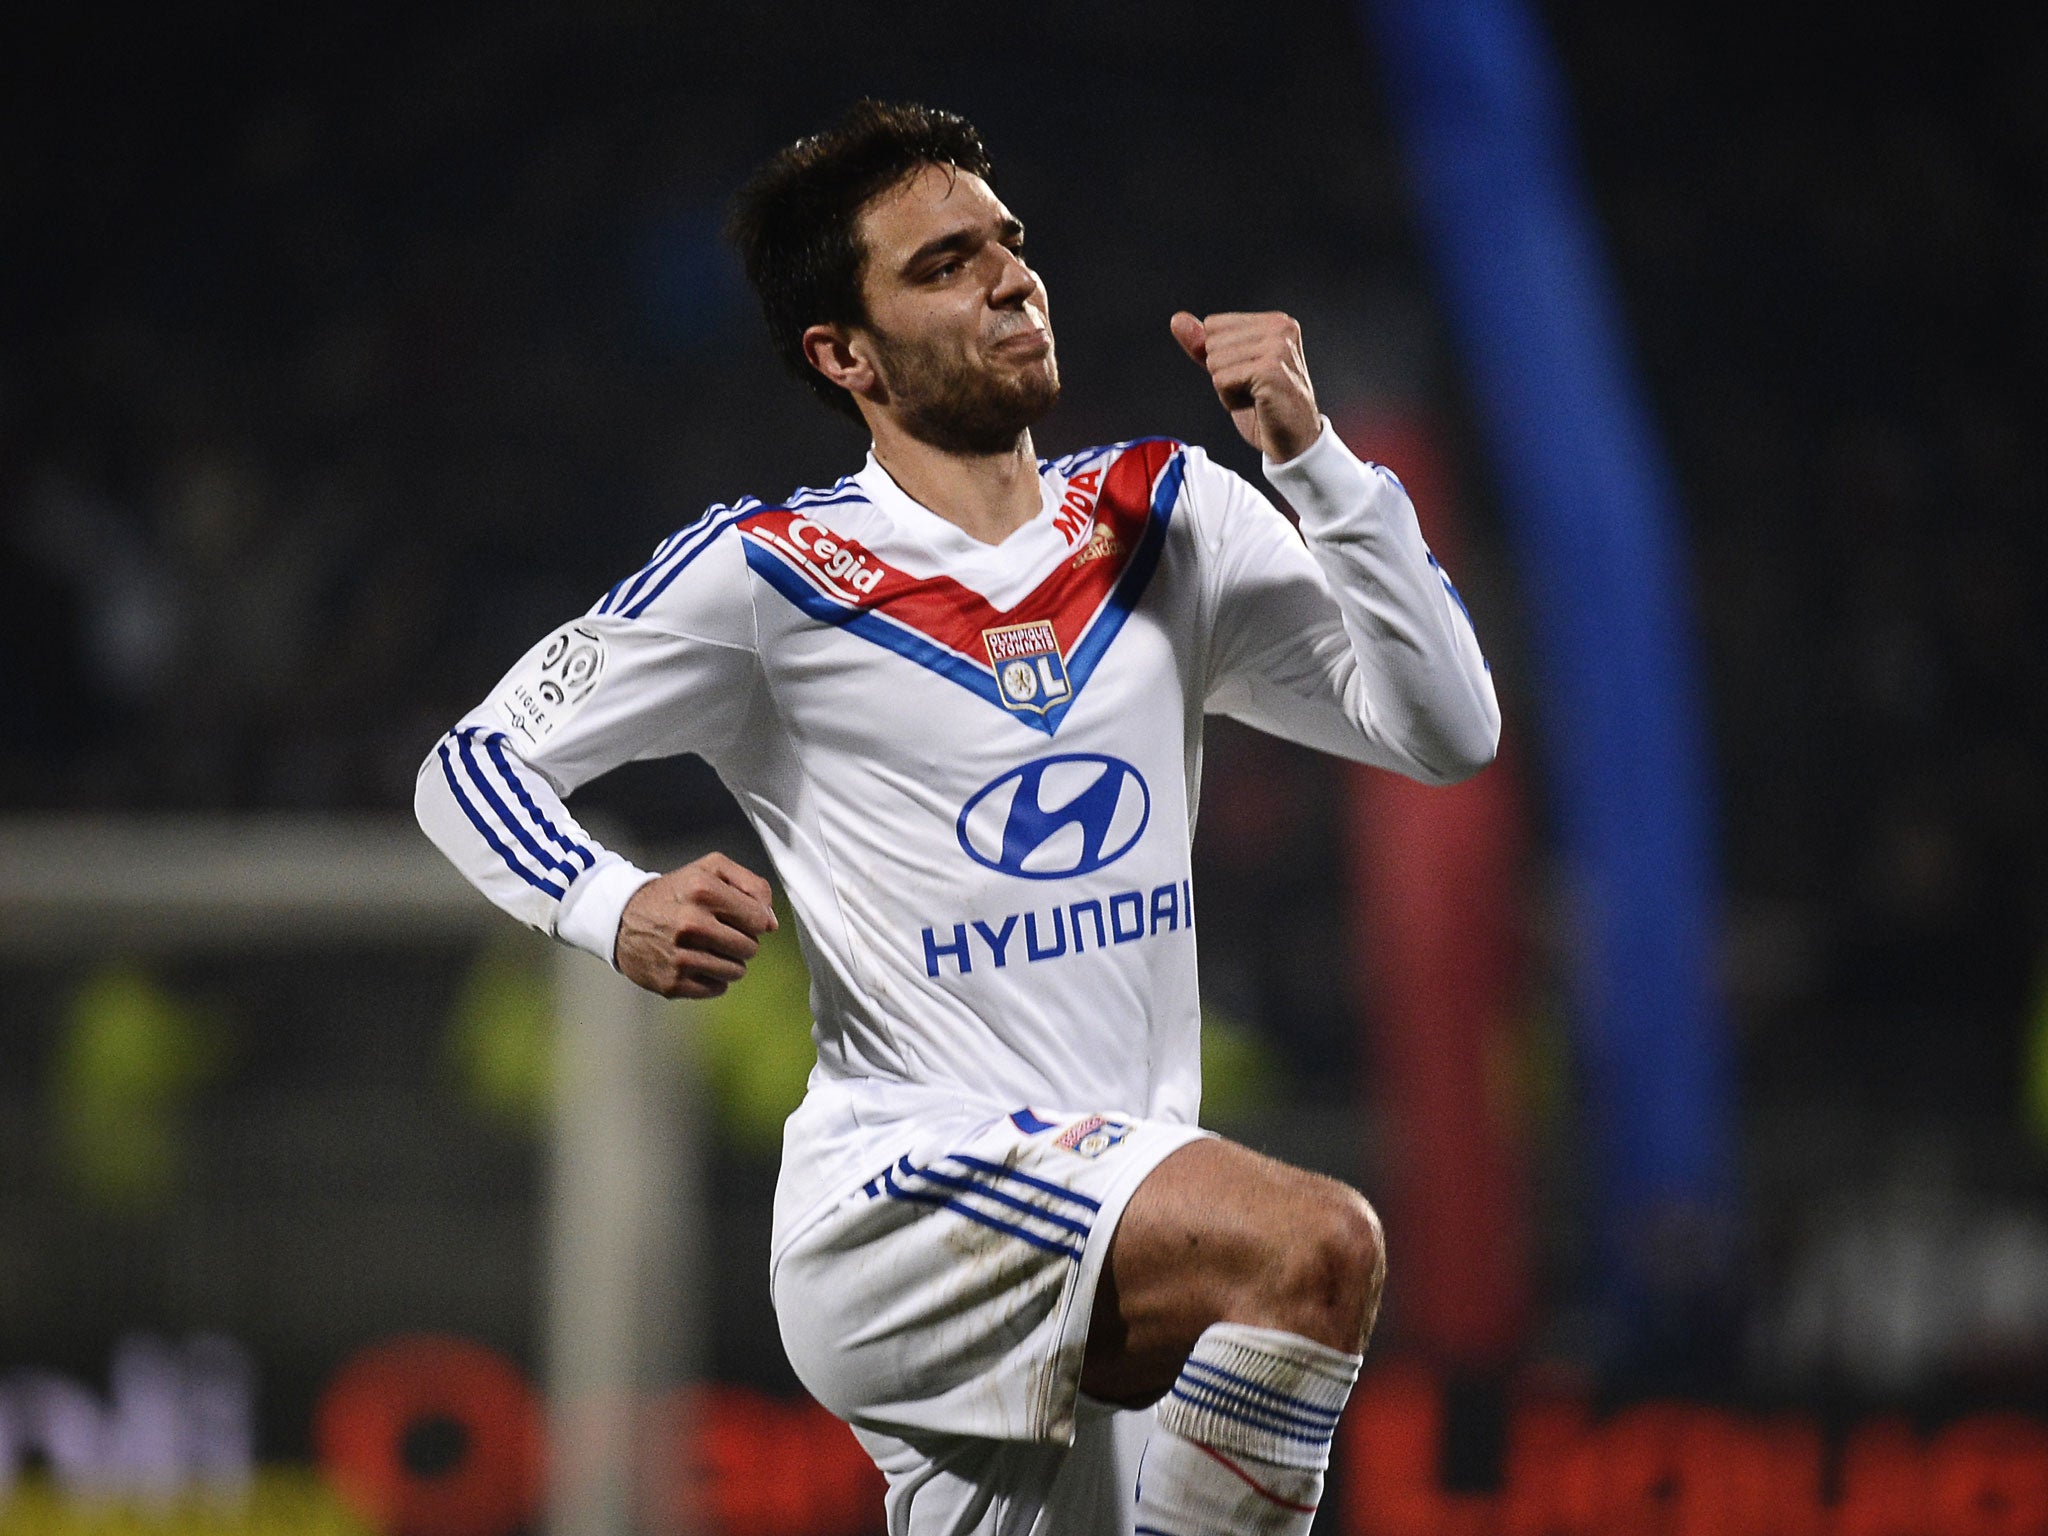 Clement Grenier could move to Newcastle to replace Yohan Cabaye after Newcastle made a reported £20m offer for the Lyon Frenchman